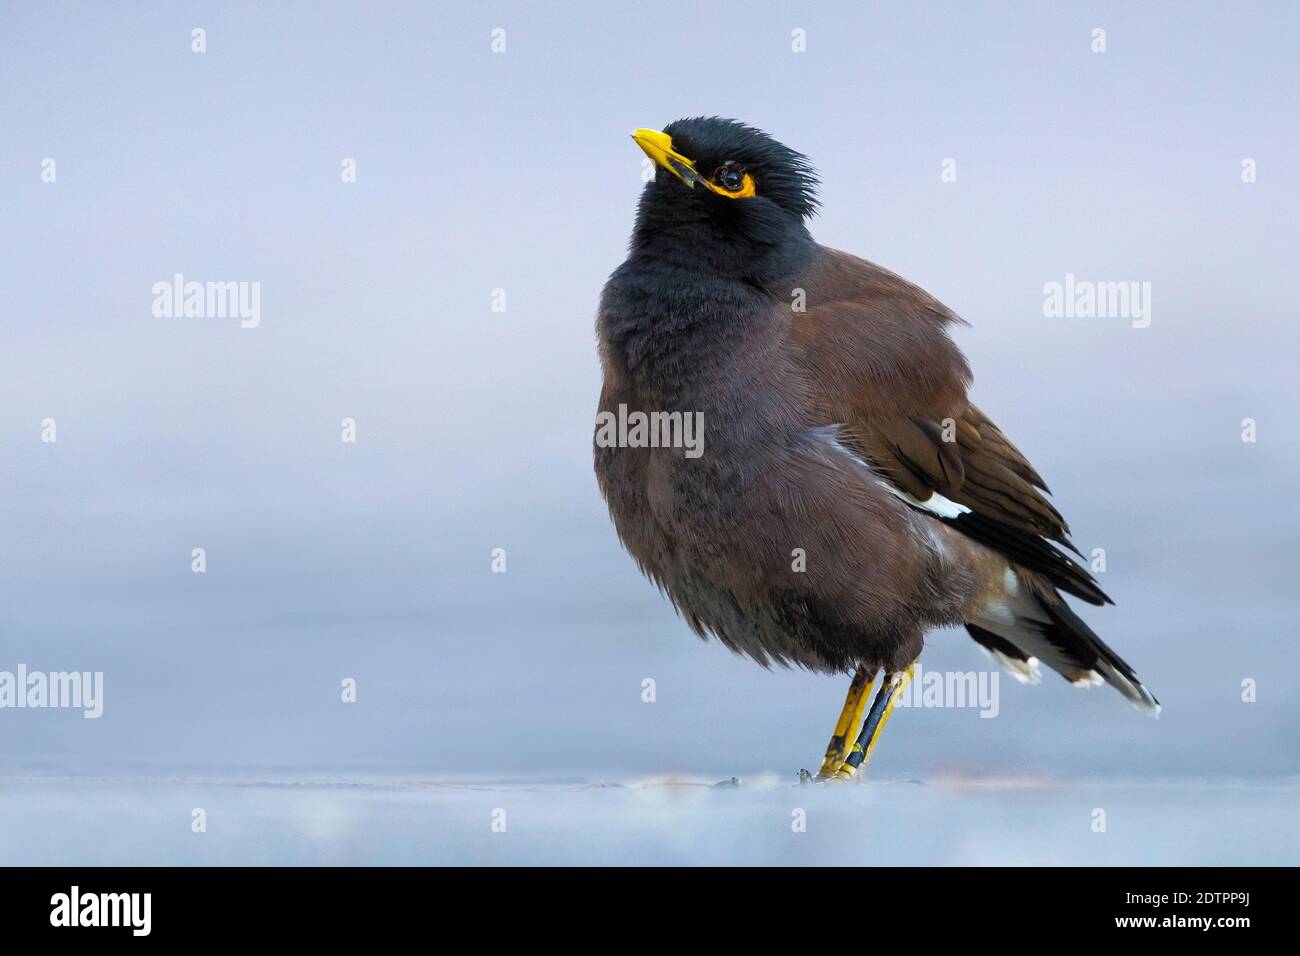 Common Mynah standing on the ground. Stock Photo